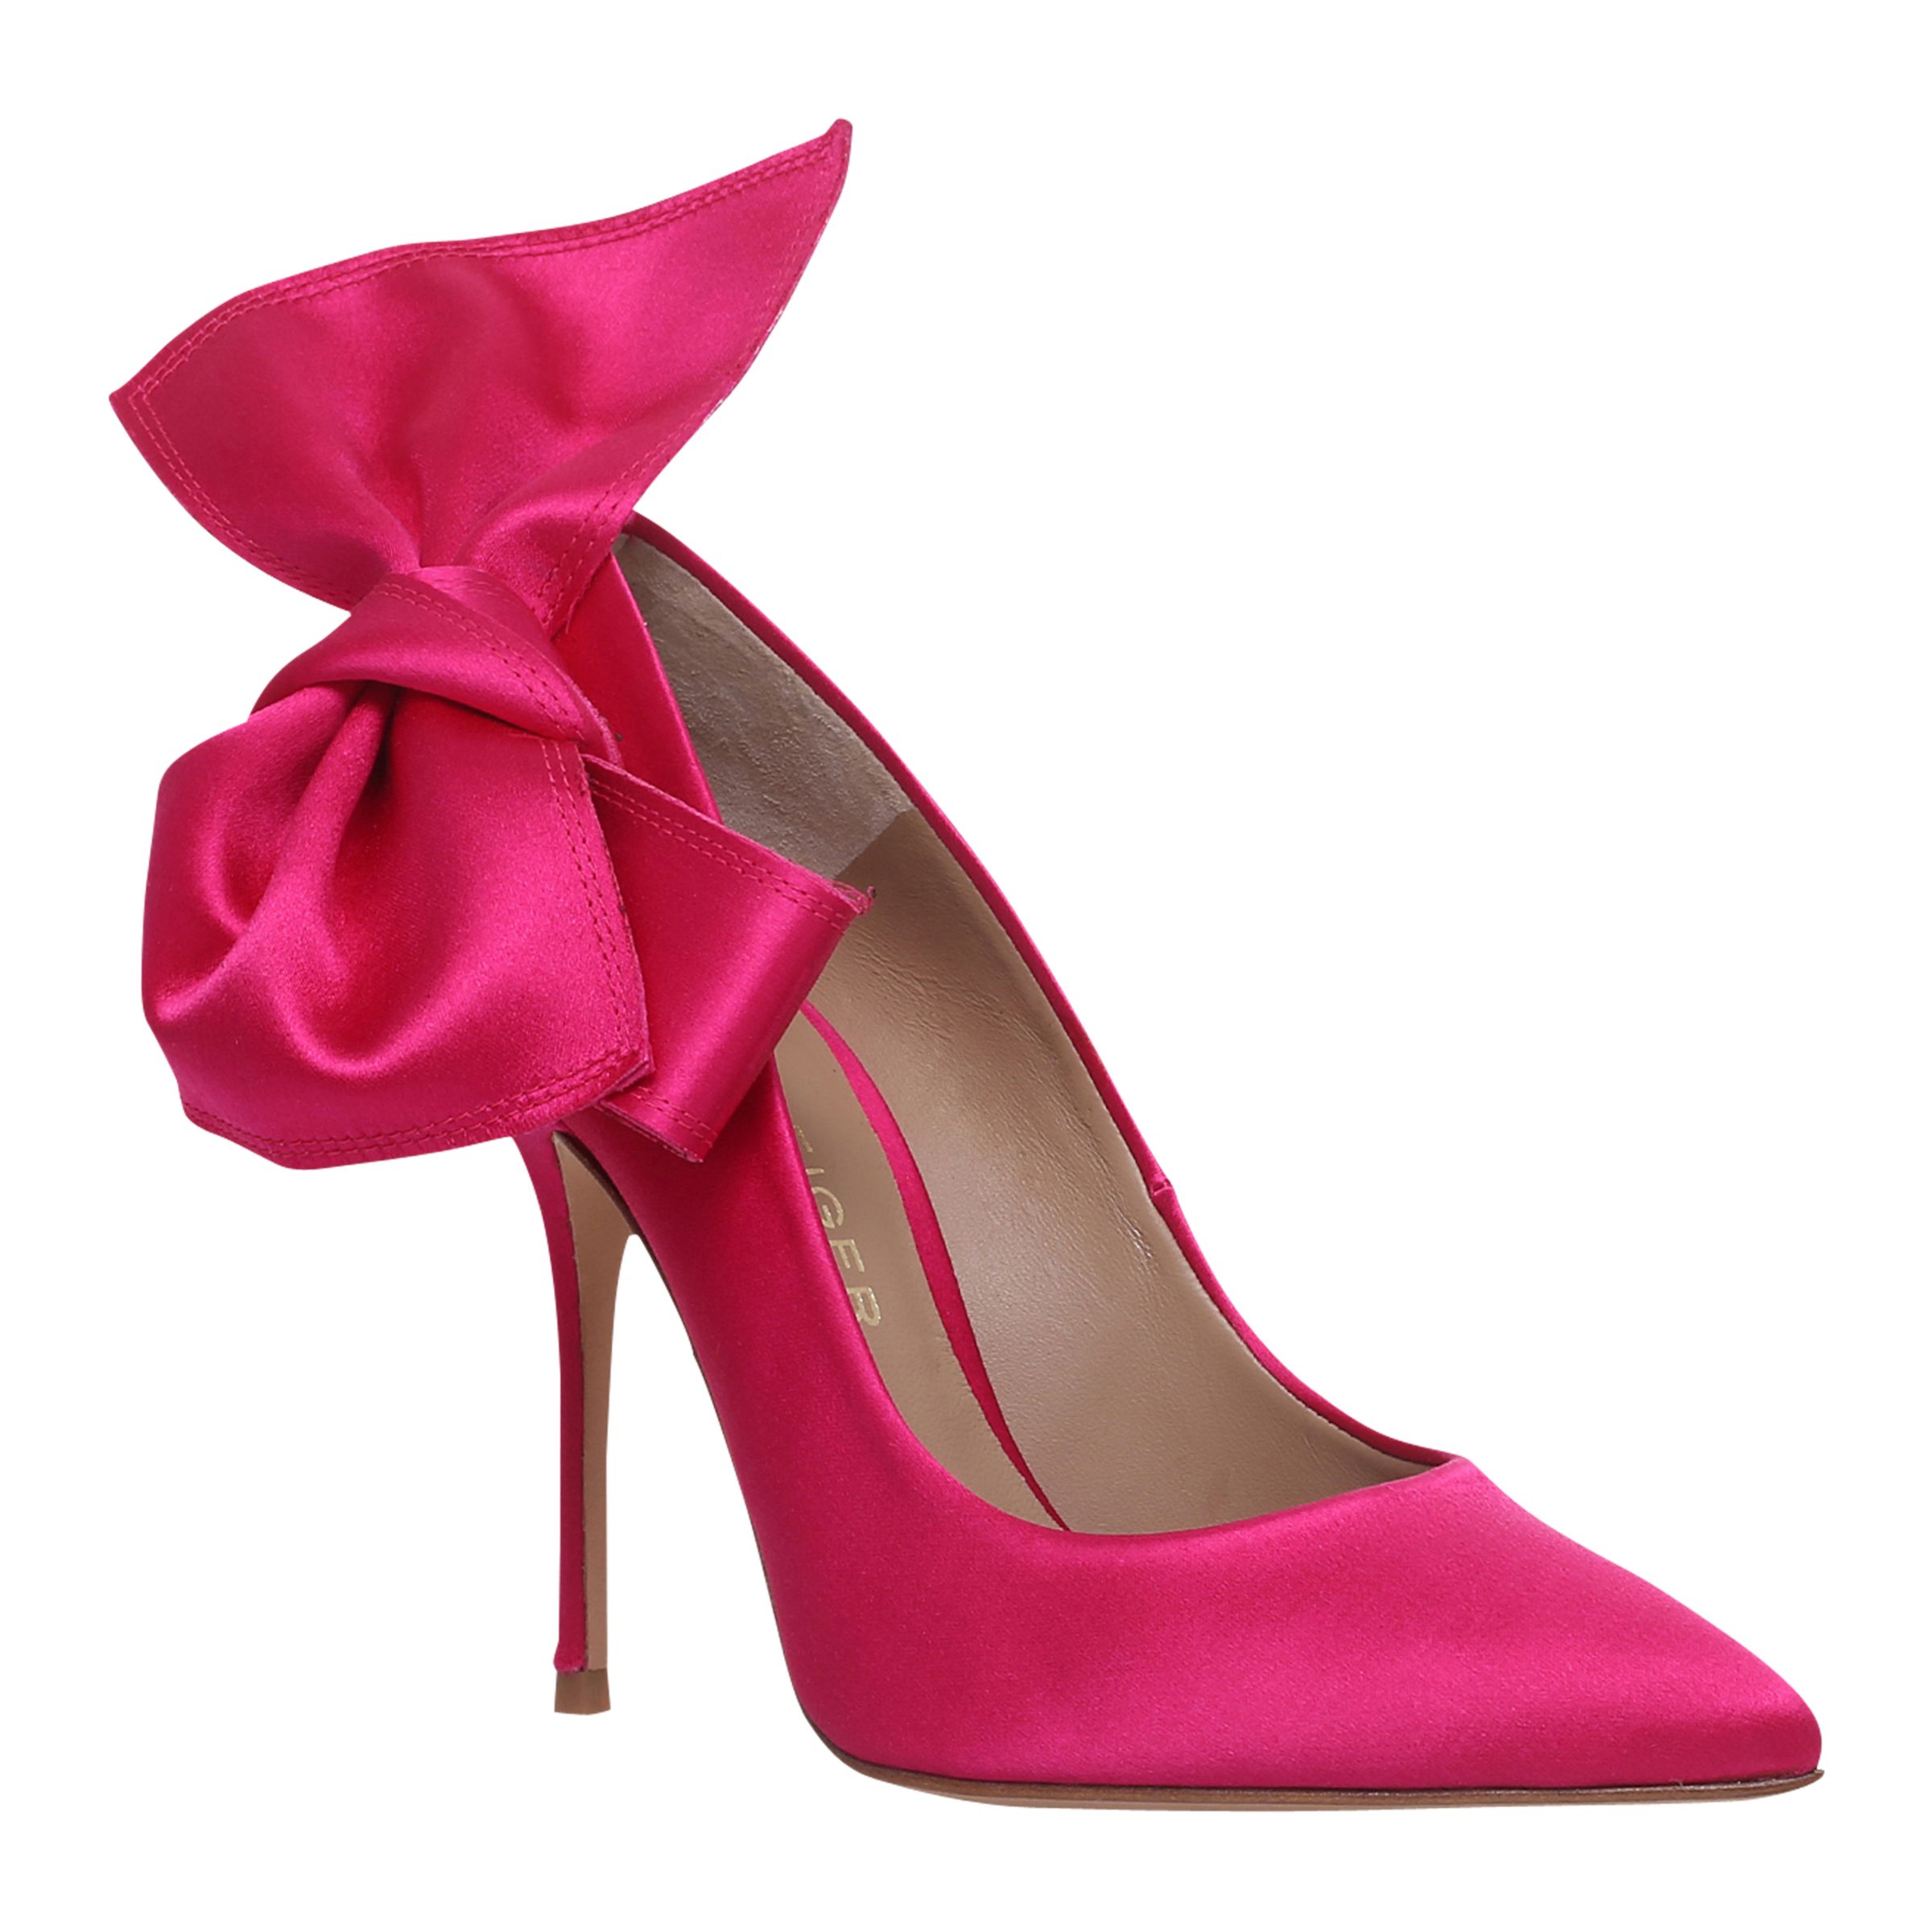 hot pink satin shoes